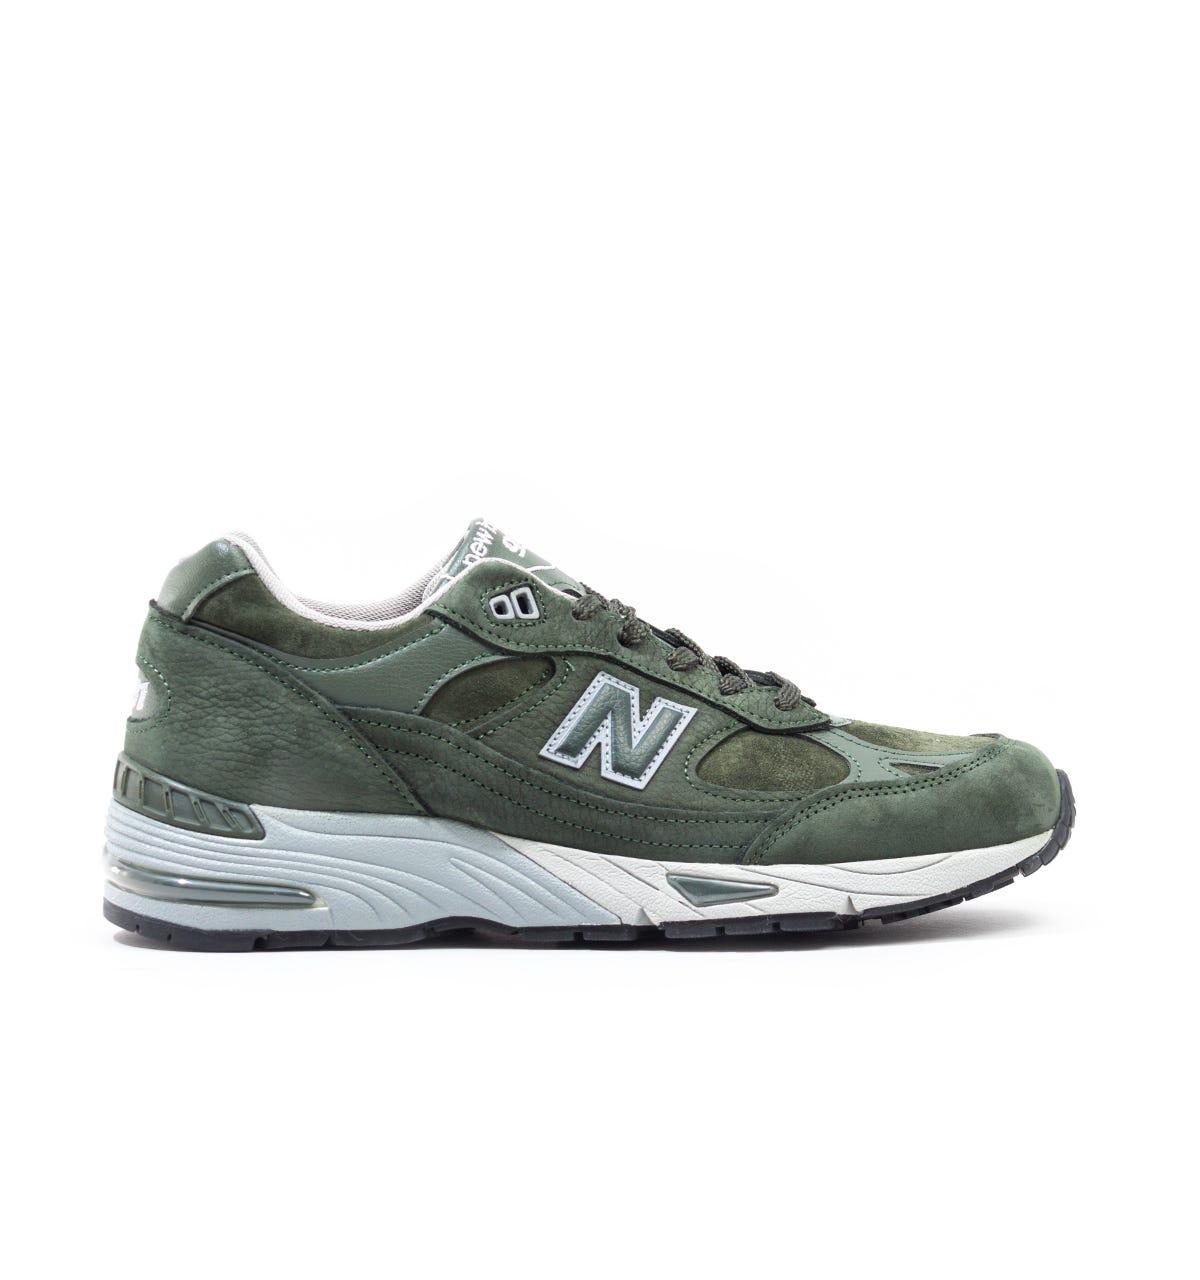 New Balance 991 Made In England Dark Green & Grey Suede Trainers ...